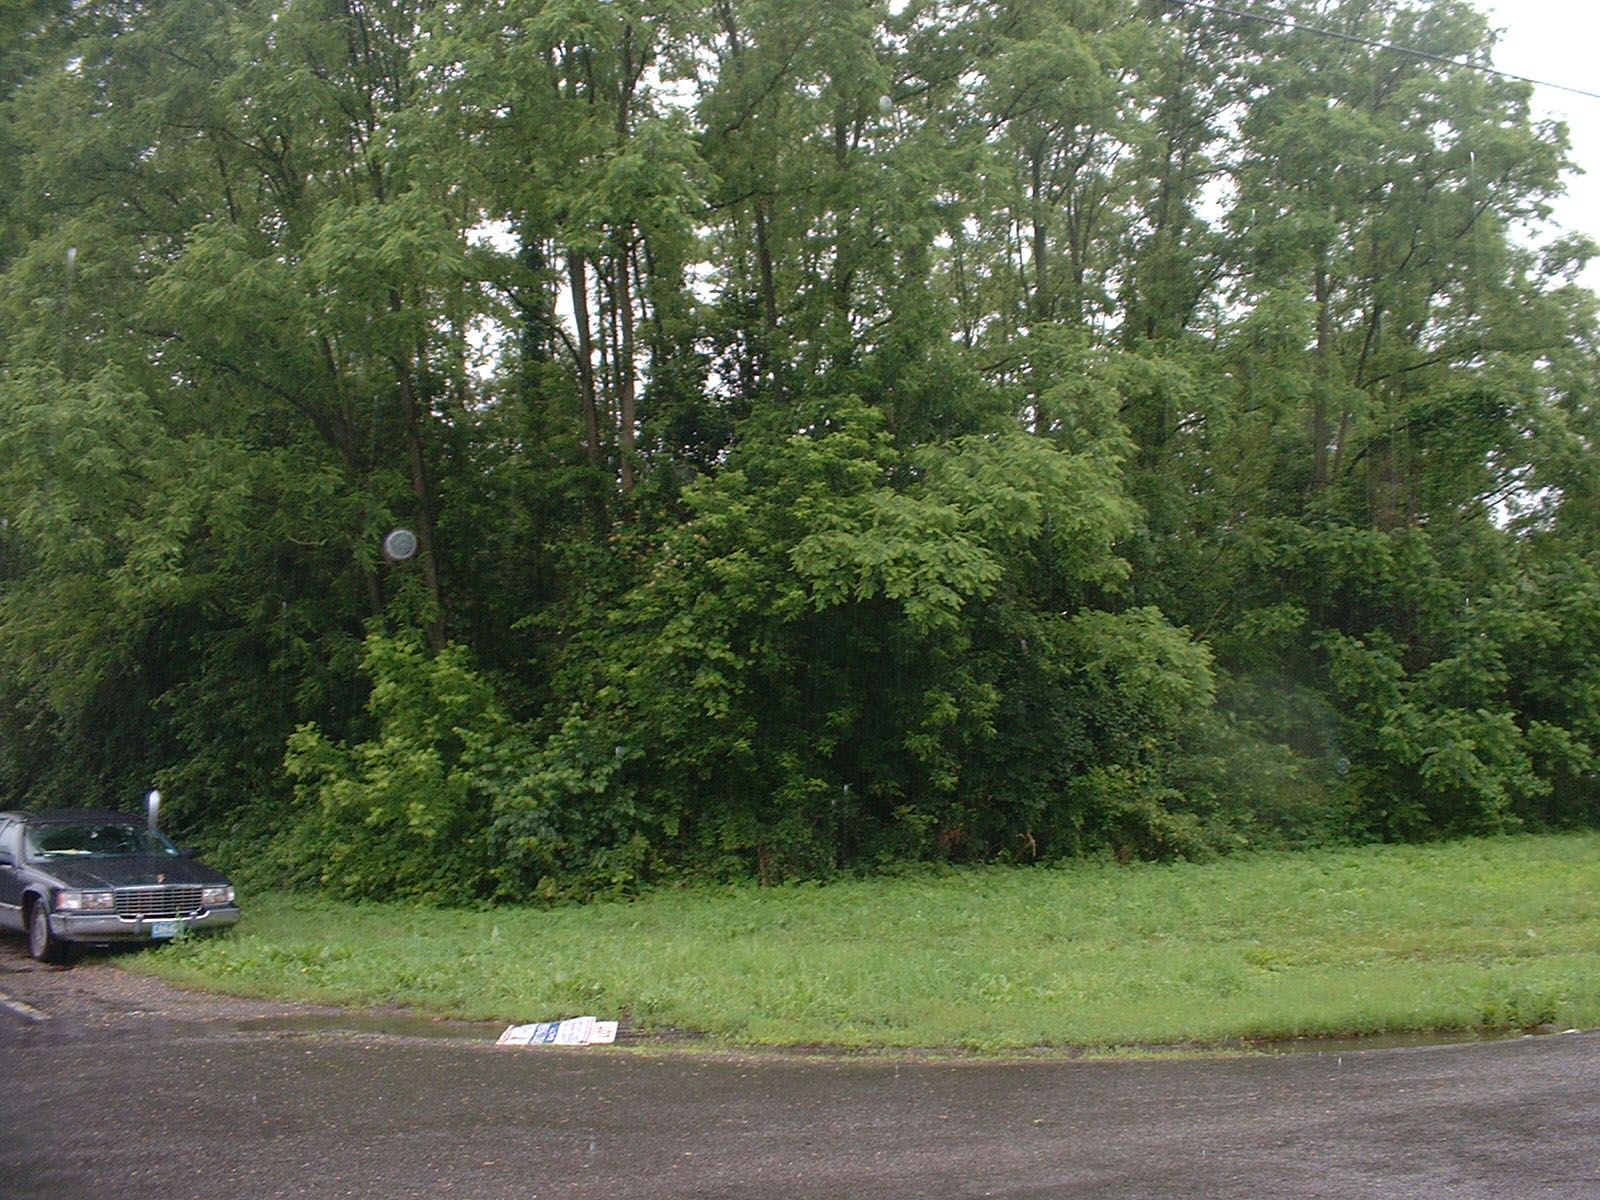 This picture from the center of the street shows the beautifully wooded lot.